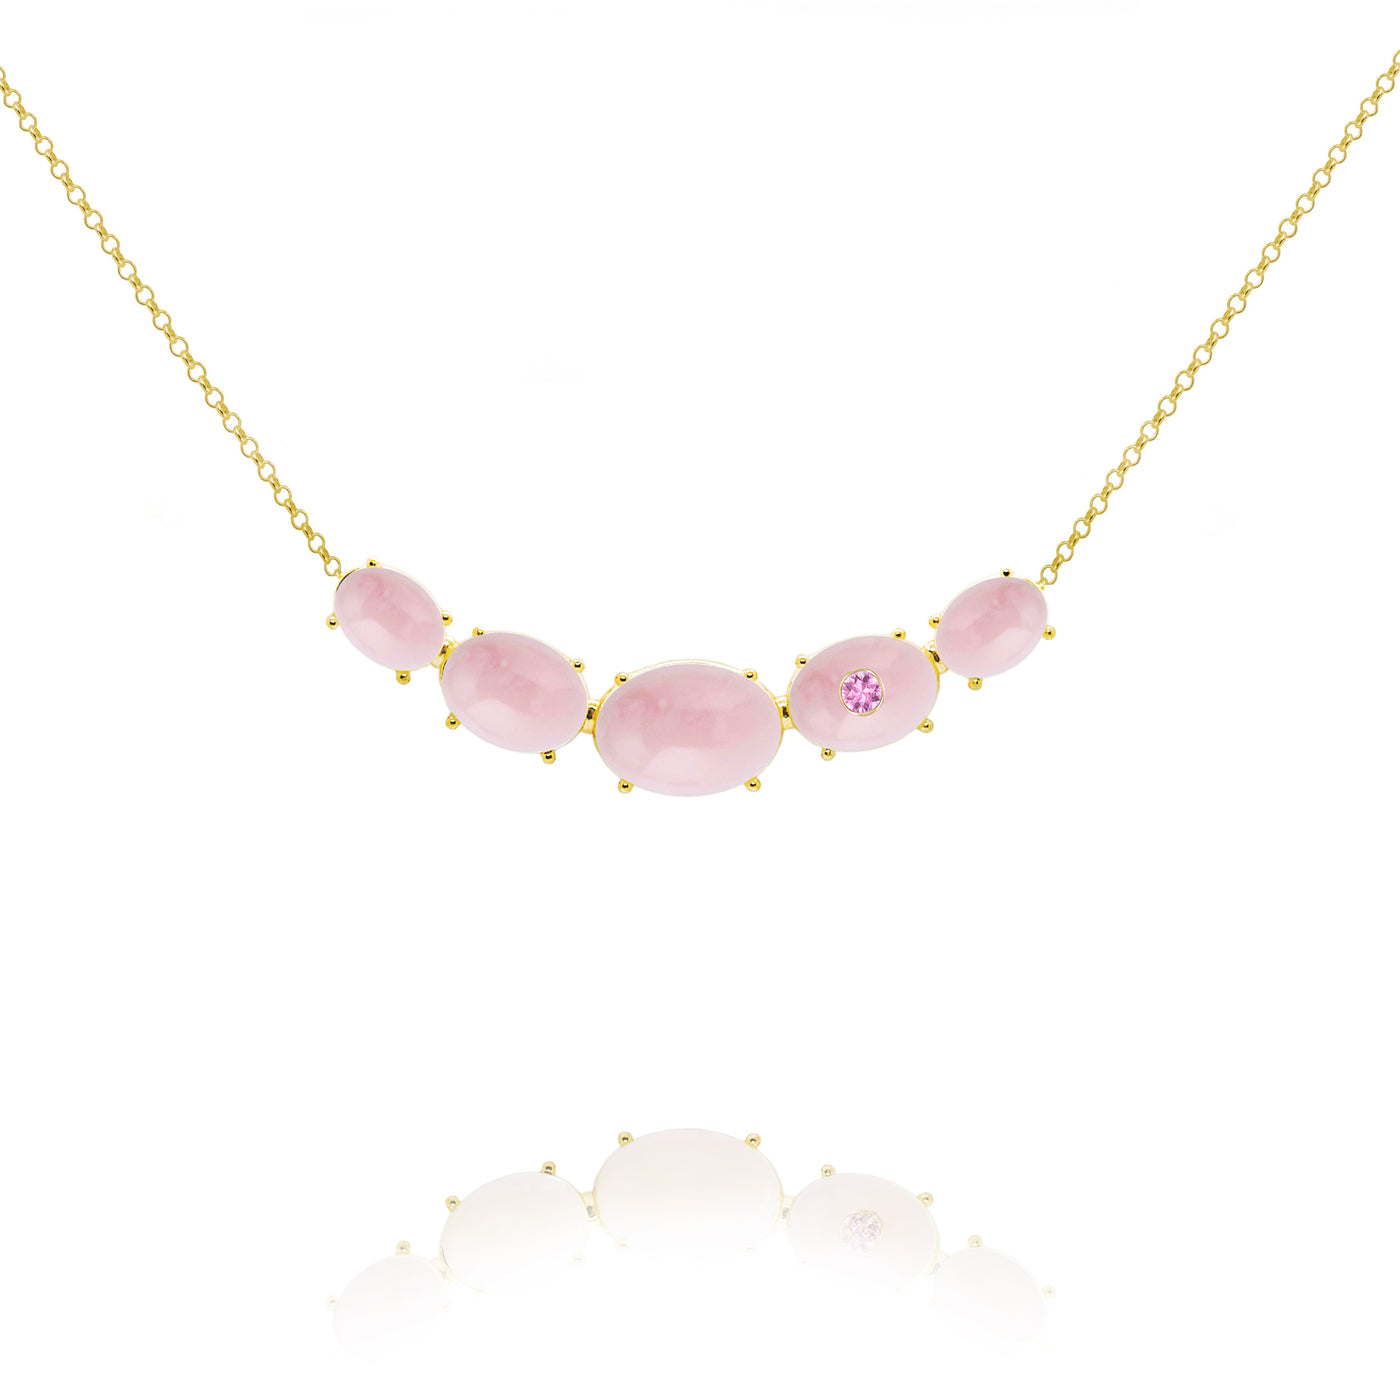 fine jewelry necklace in gold with pink opal and pink tourmaline gemstones from Atelier ORMAN